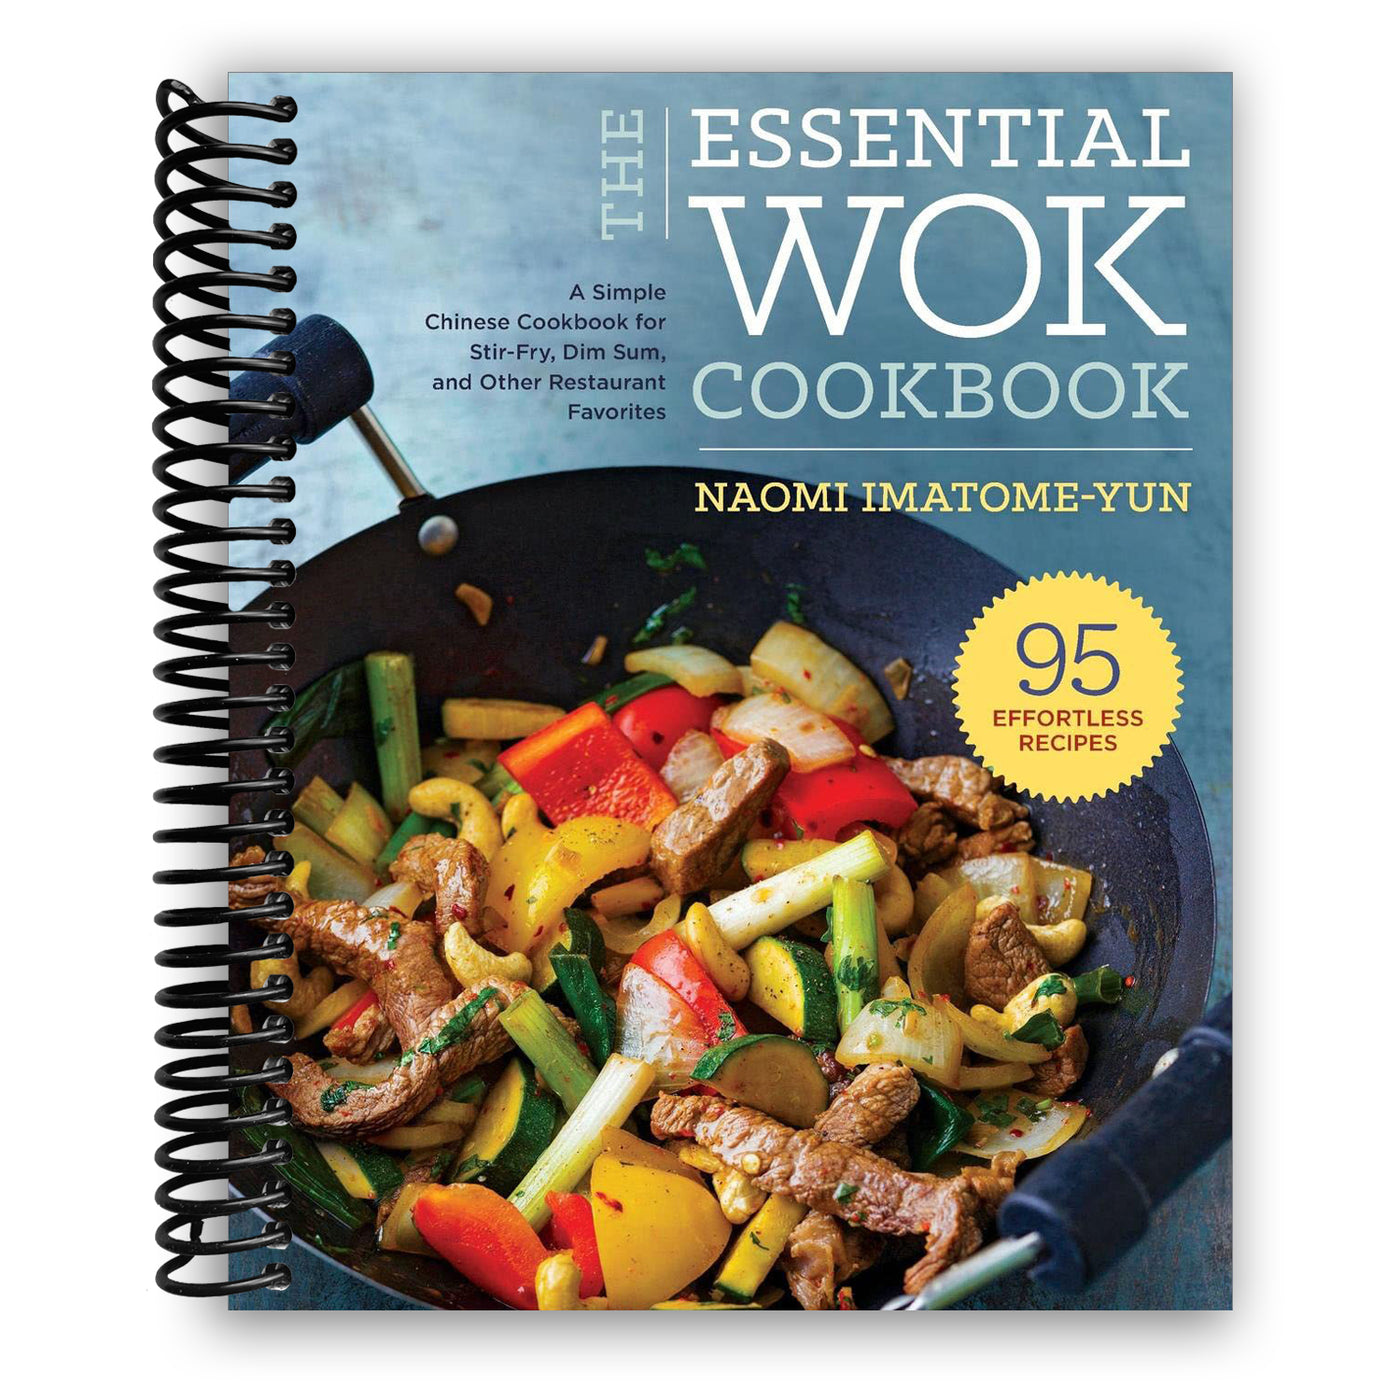 Essential Wok Cookbook: A Simple Chinese Cookbook for Stir-Fry, Dim Sum, and Other Restaurant Favorites (Spiral Bound)